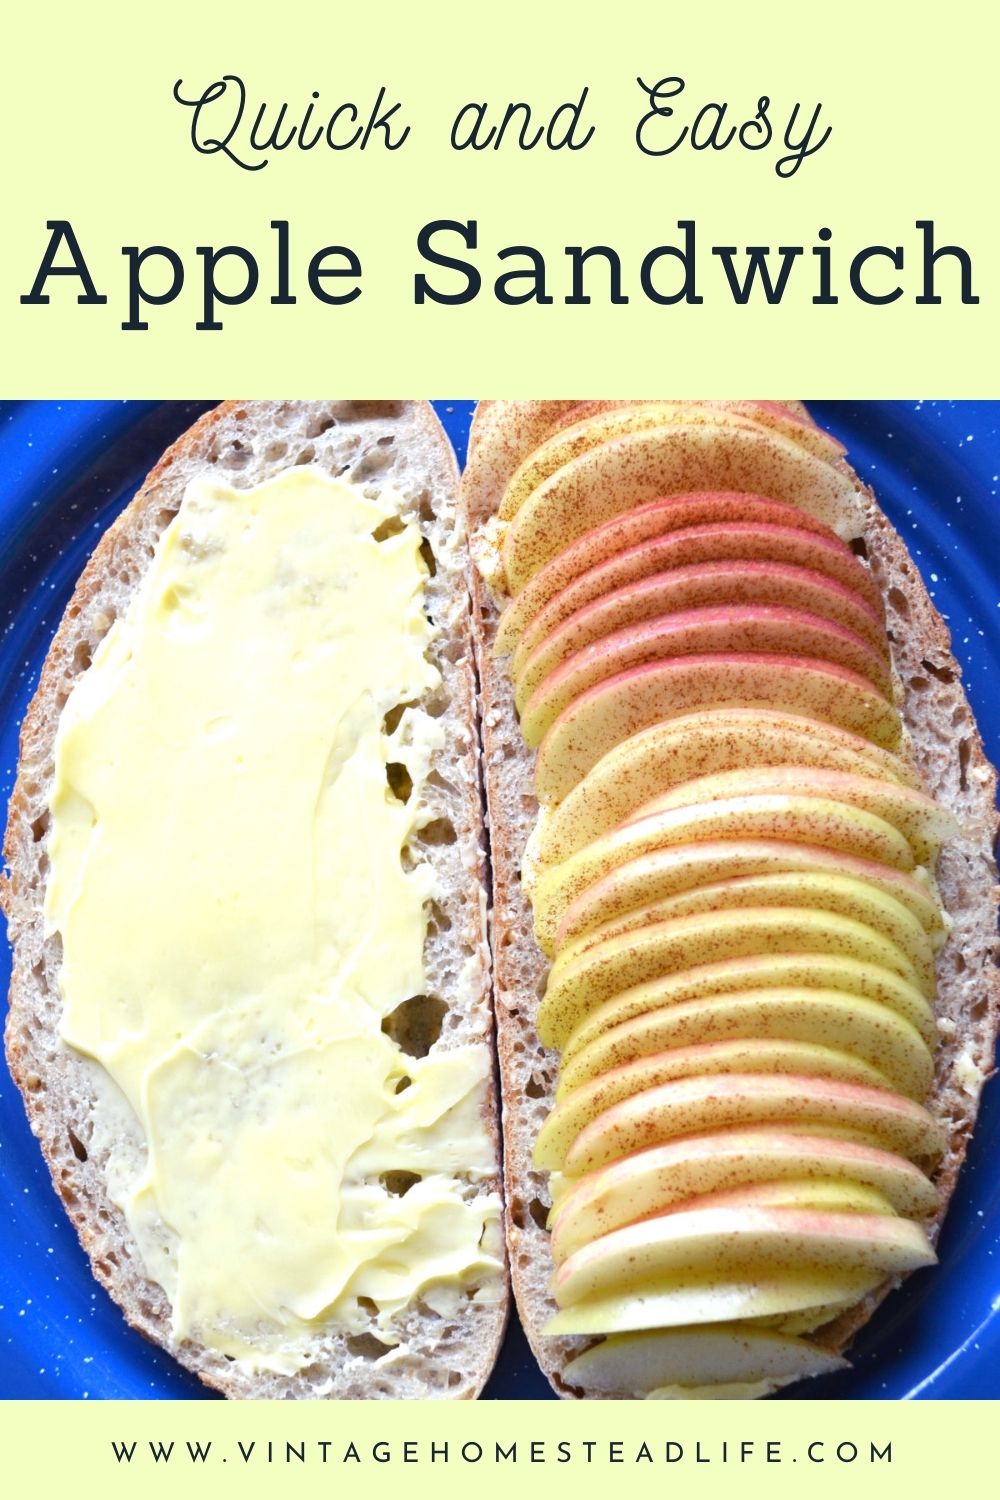 Apple Sandwiches are an enjoyable alternative to traditional sandwiches. If you are looking for fresh inspiration, try this recipe!